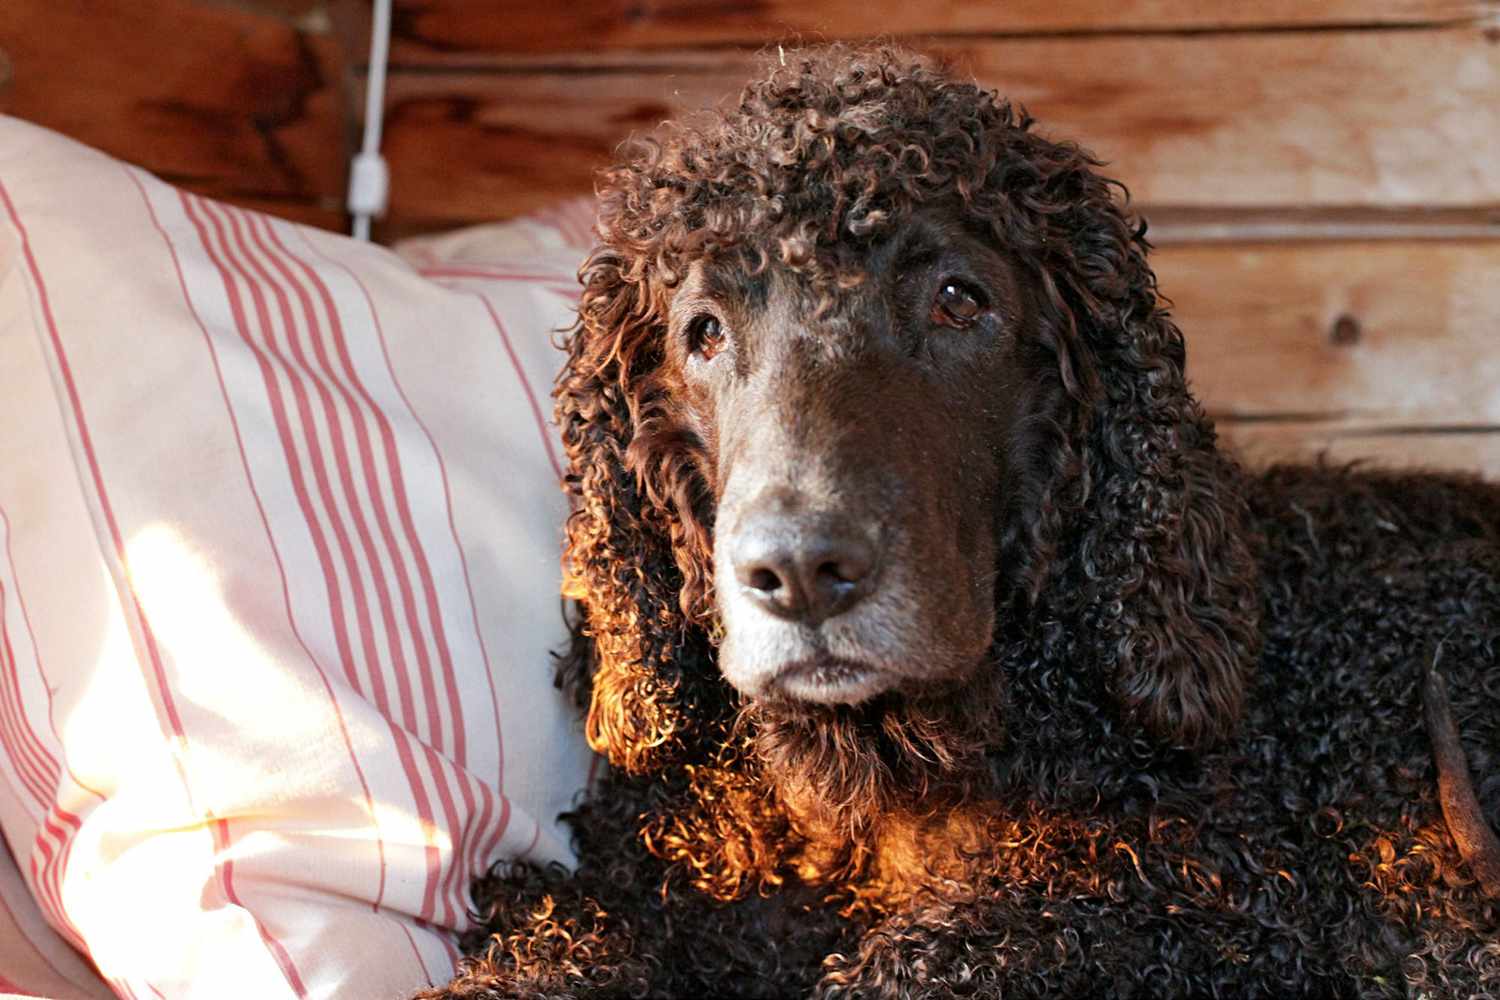 irish water spaniel lying on a striped pillow in front of wooden panelling